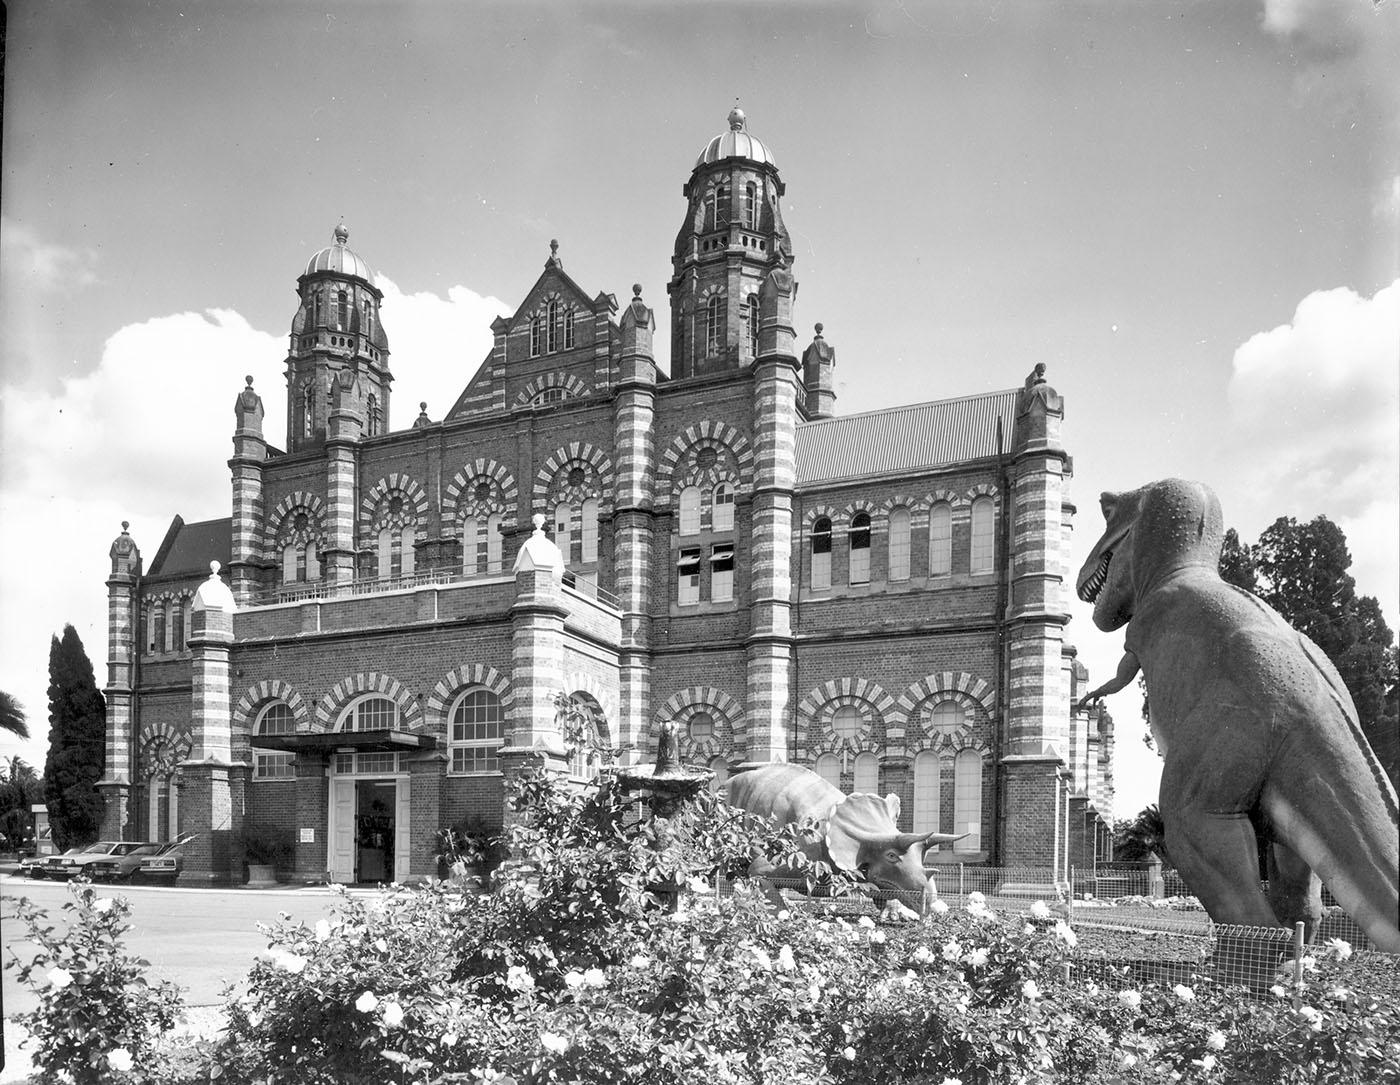 Front view of the old Queensland Museum with T. rex and triceratops dinosaur statue to the right